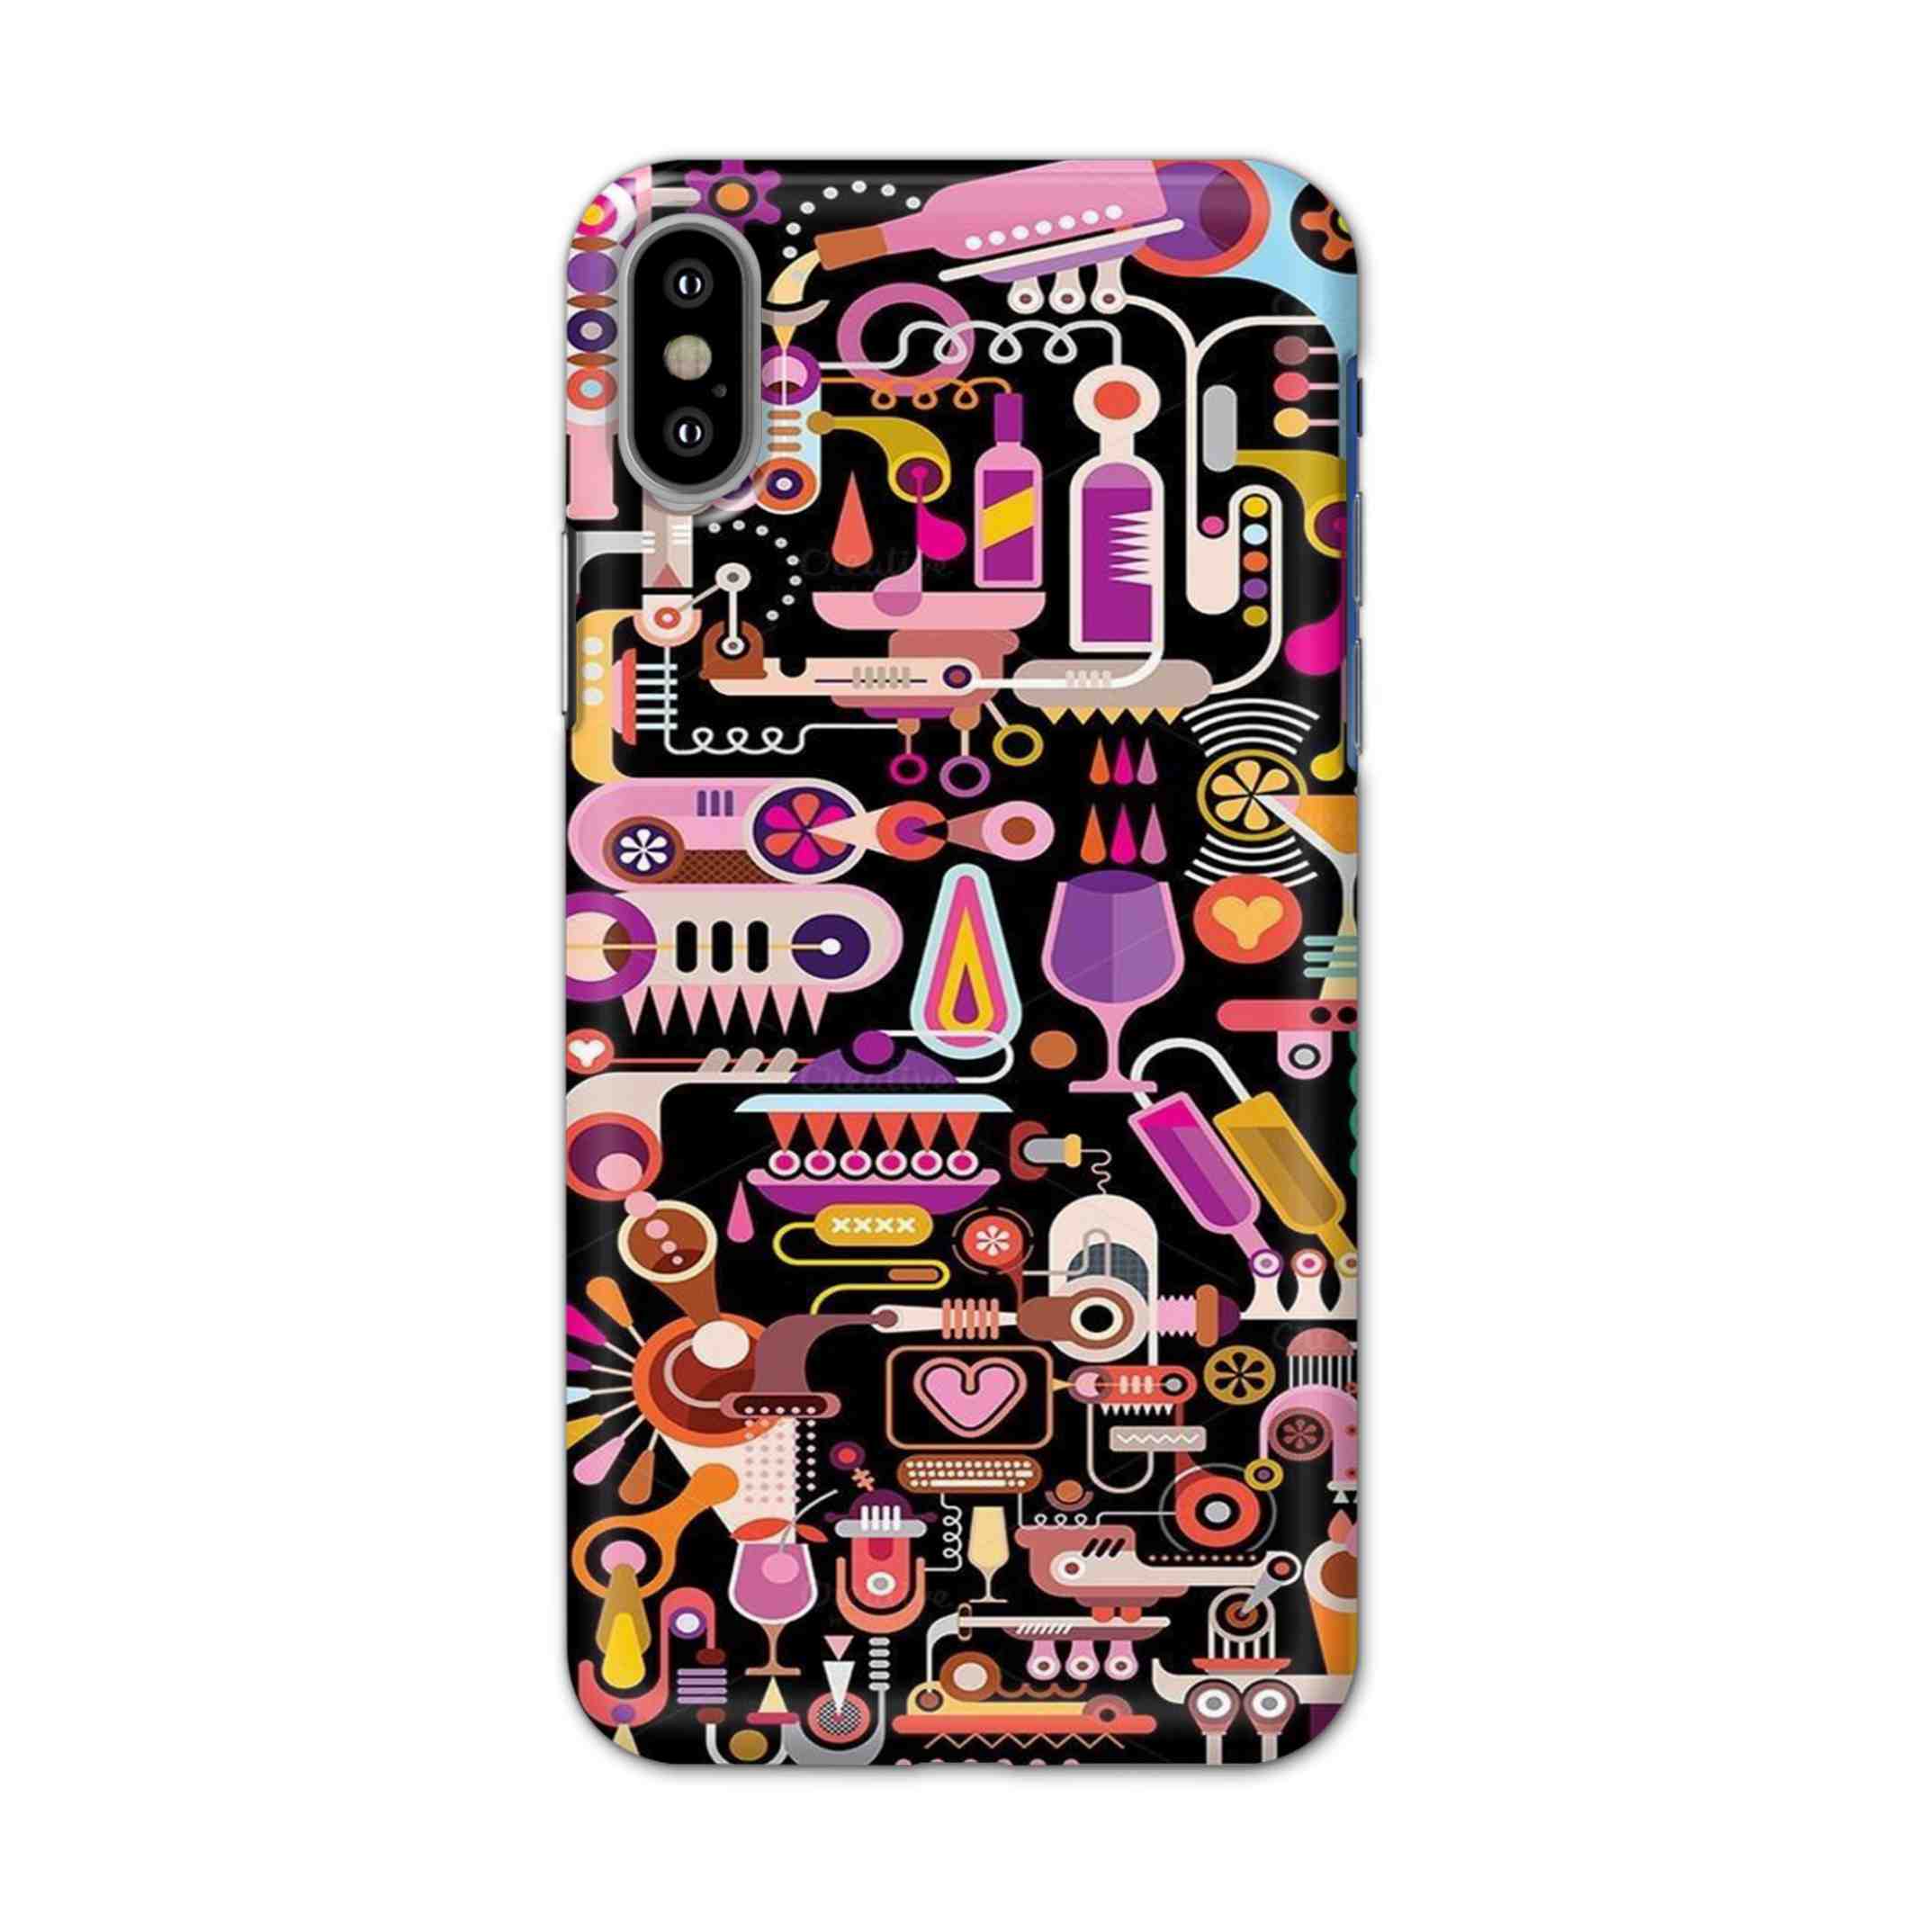 Buy Art Hard Back Mobile Phone Case/Cover For iPhone X Online